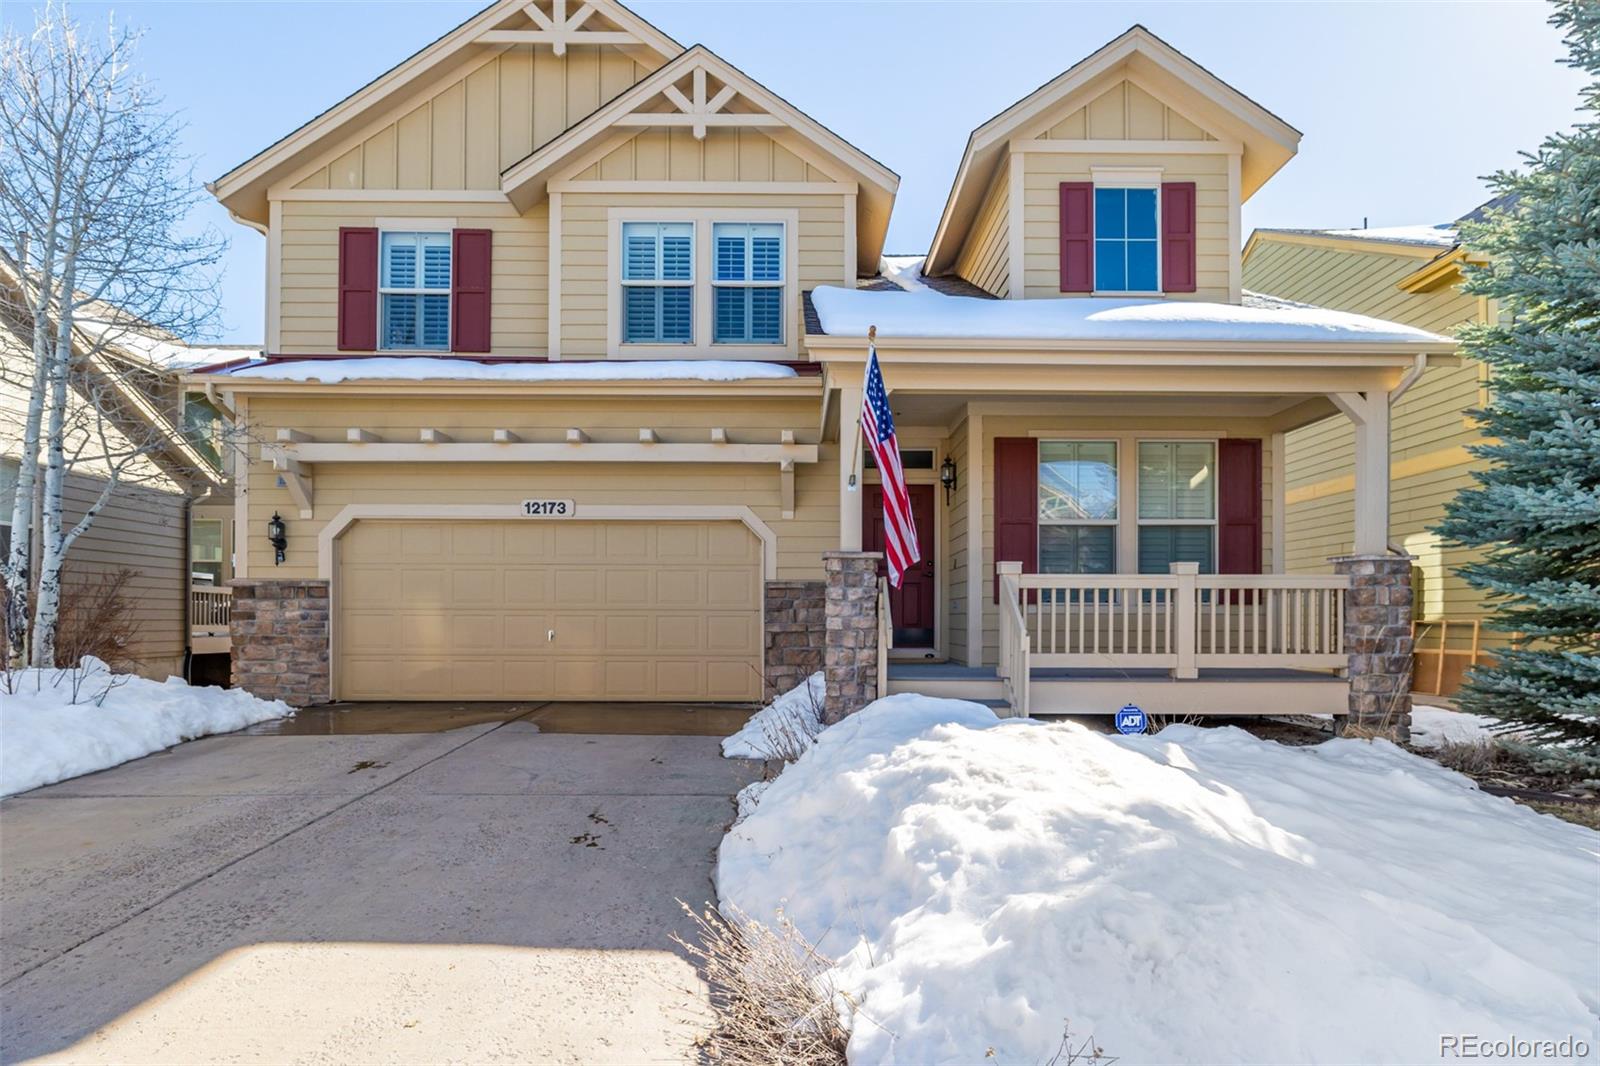 Report Image for 12173 S Tallkid Court,Parker, Colorado